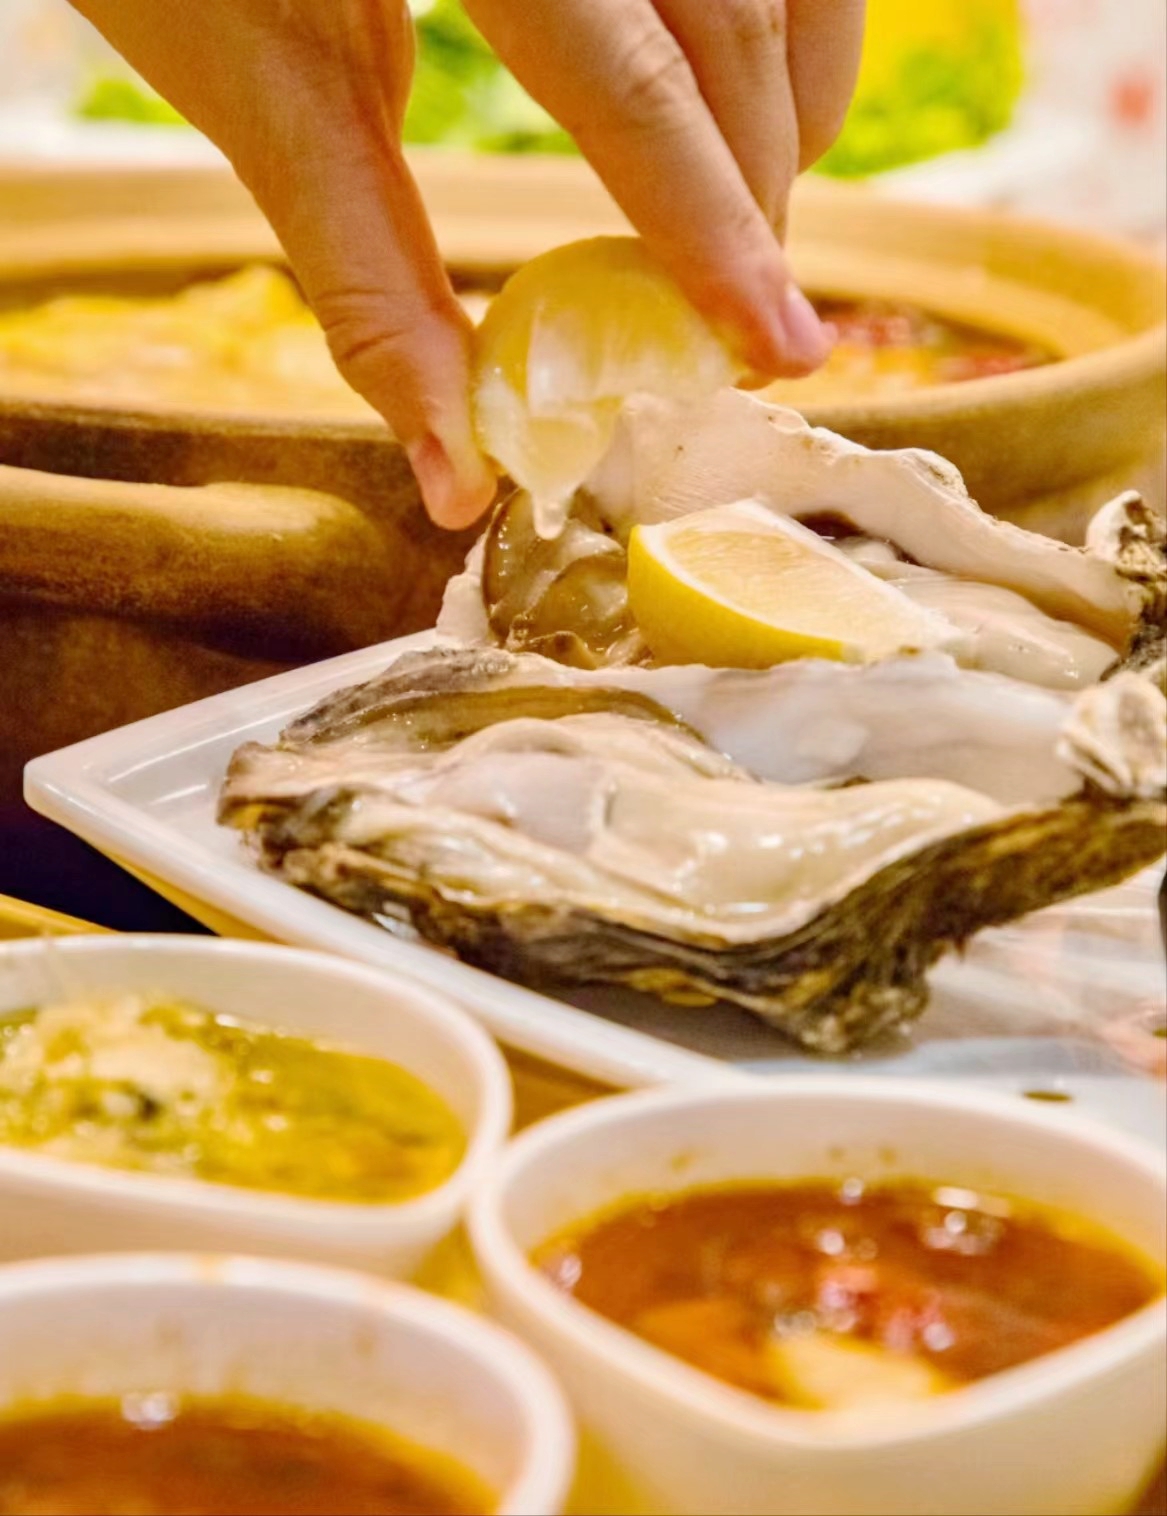 Oyster and chicken hot pot is popular in Hainan during the winter months. /Photo provided to CGTN